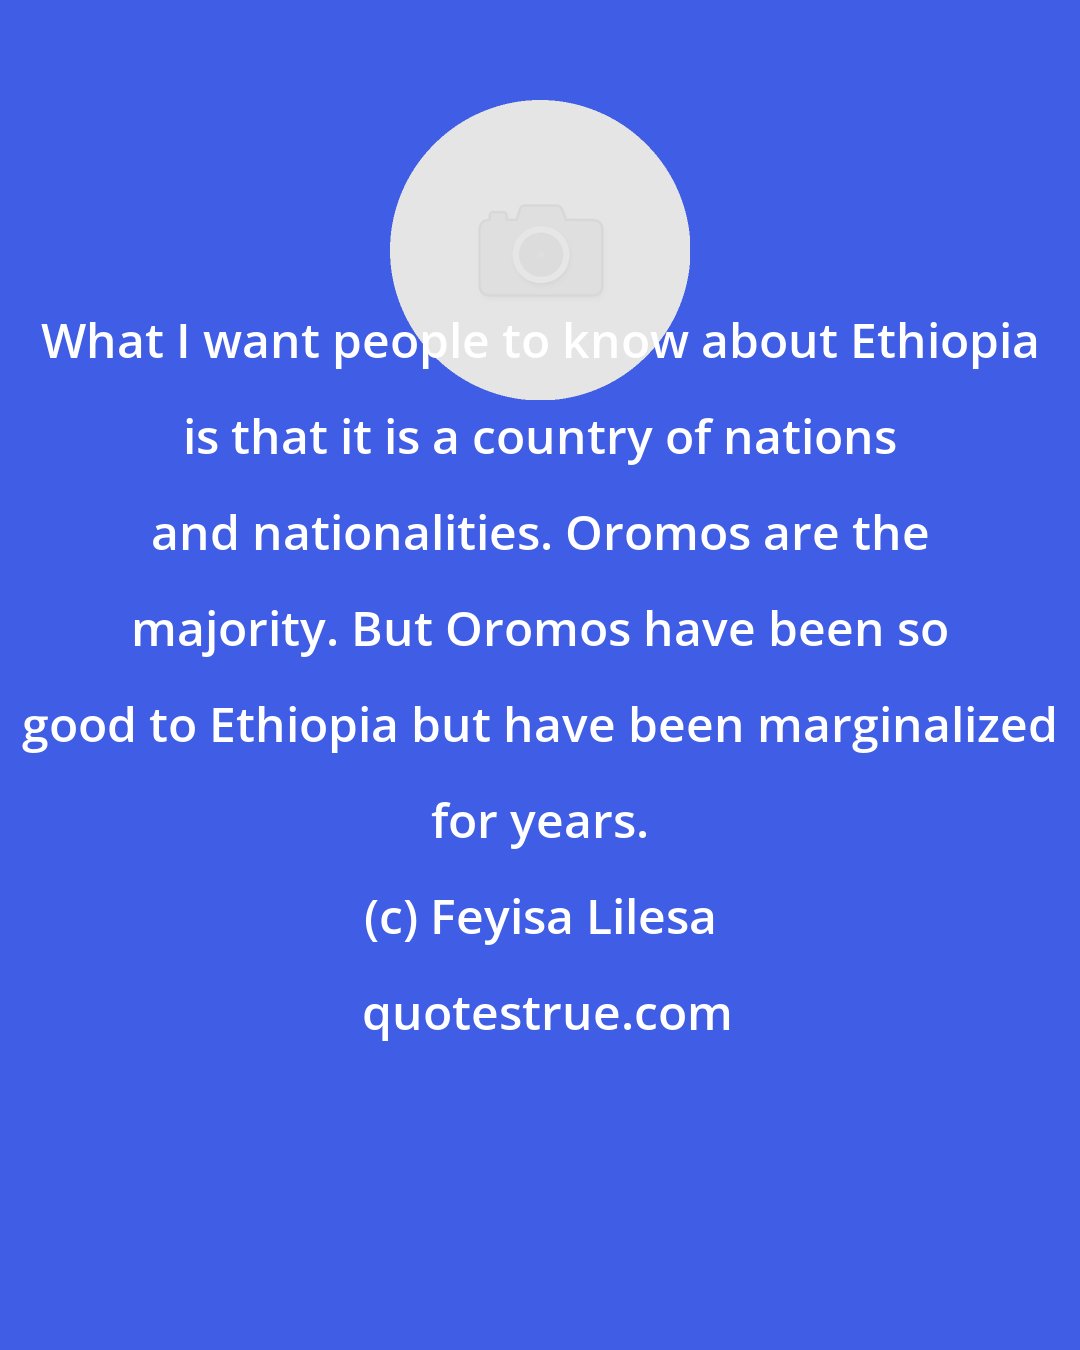 Feyisa Lilesa: What I want people to know about Ethiopia is that it is a country of nations and nationalities. Oromos are the majority. But Oromos have been so good to Ethiopia but have been marginalized for years.